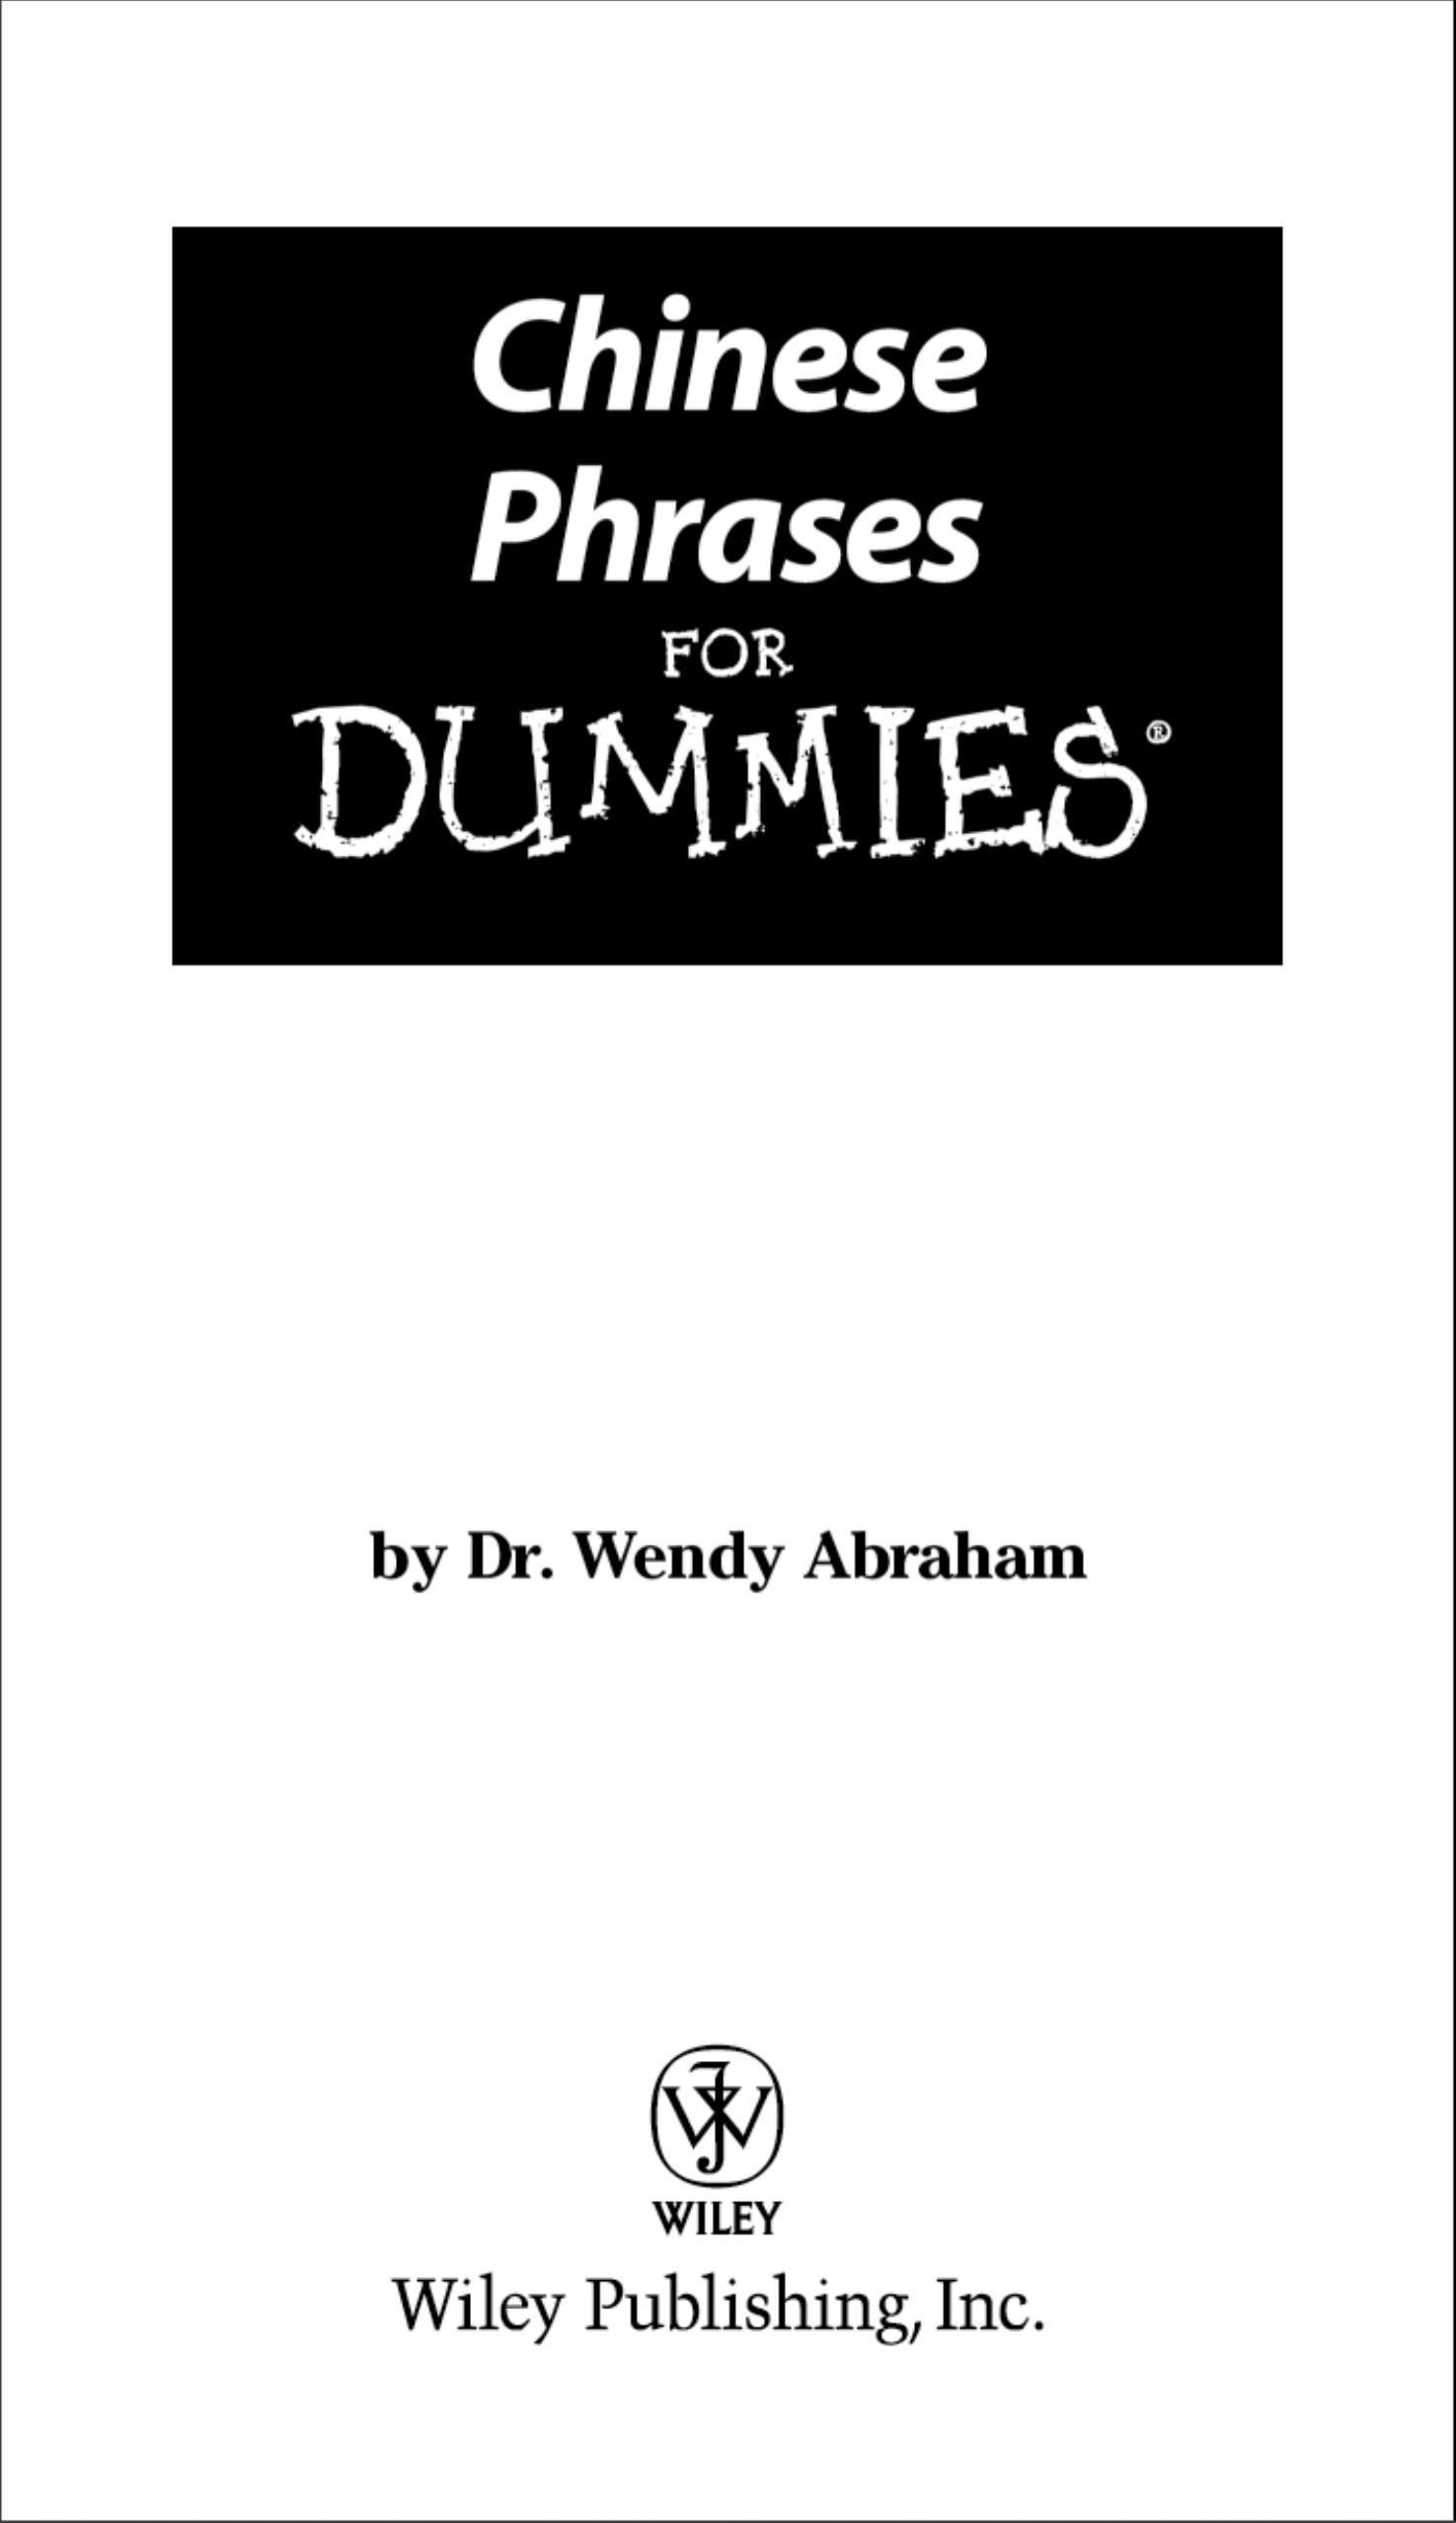 Chinese Phrases for Dummies by Wendy Abraham